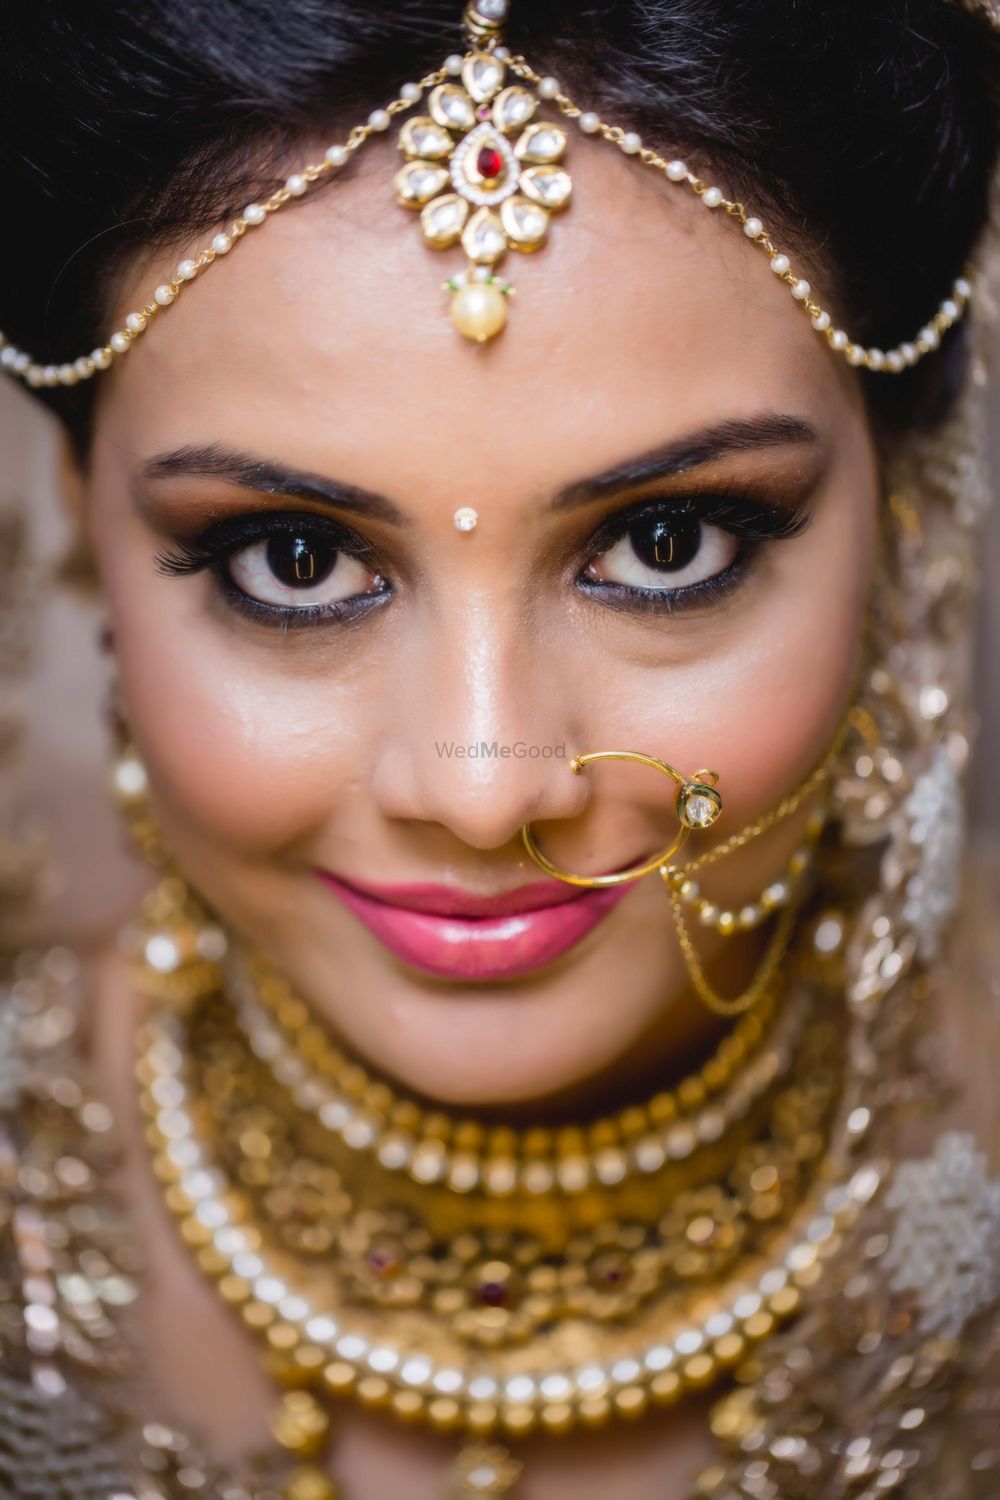 Photo From Bridal - By Deep Panchal's Photography